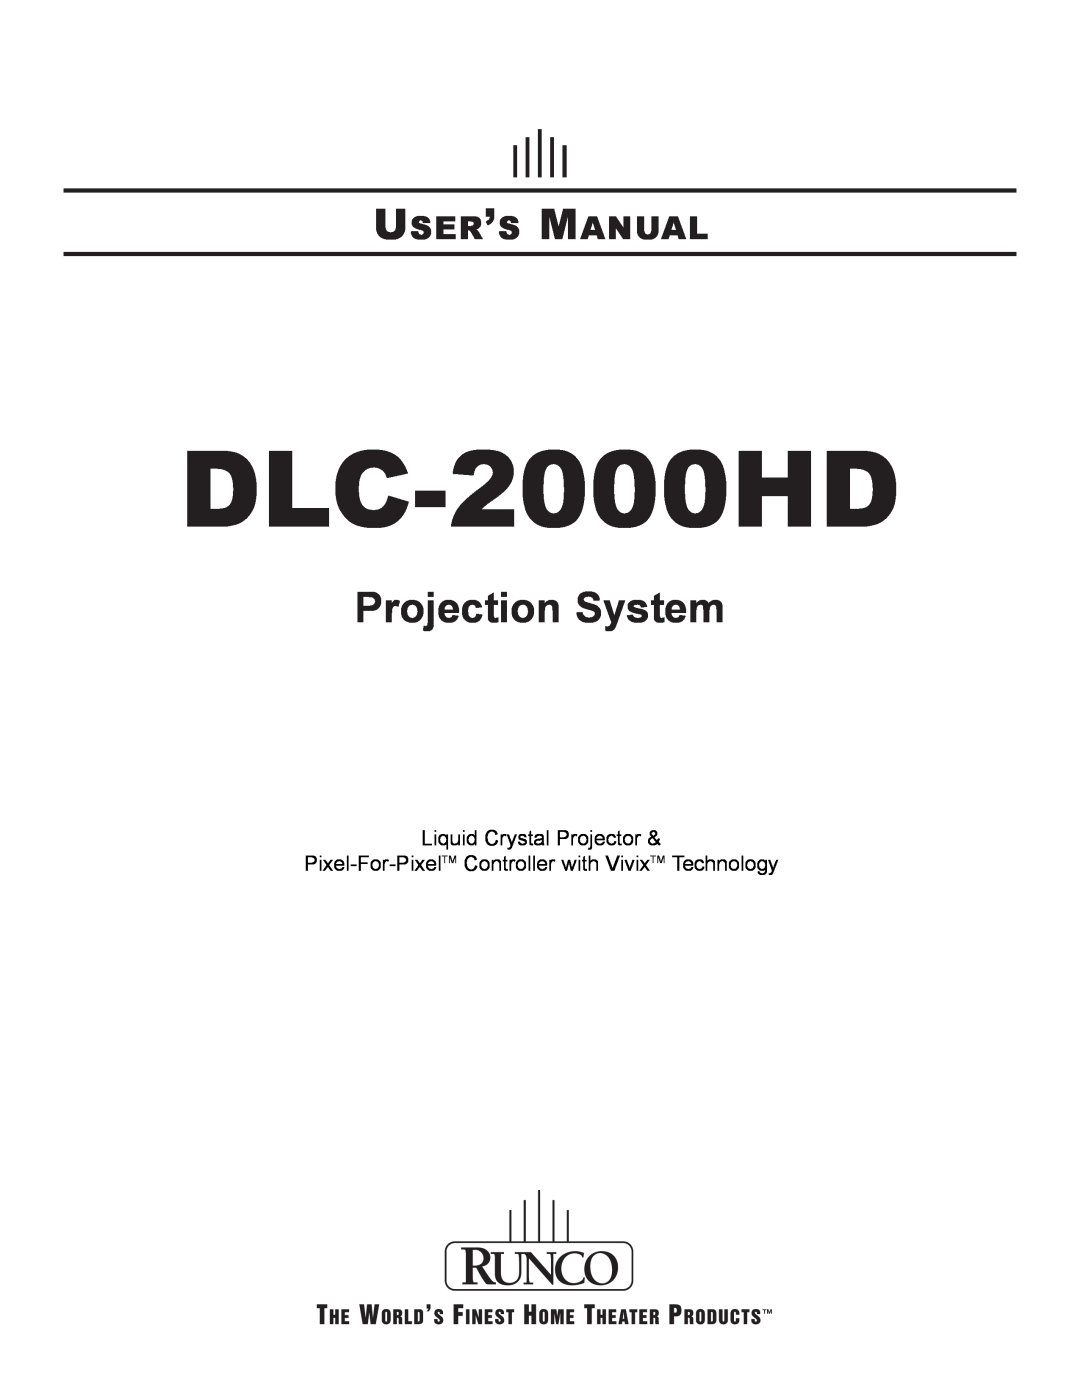 Runco DLC-2000HD user manual User’S Manual, Projection System 